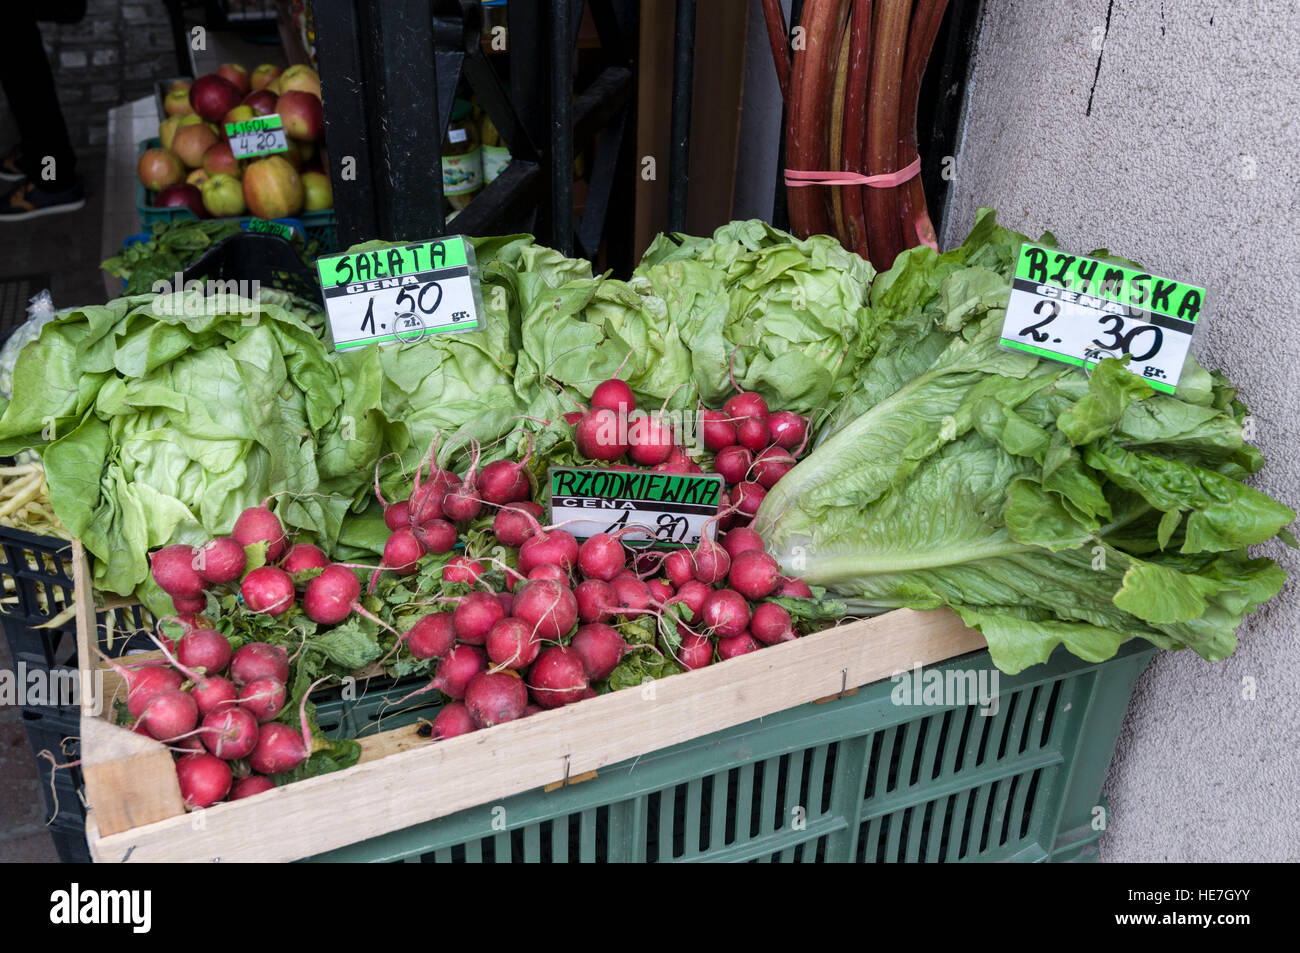 Horse radish and lettuce on sale at a vegetable store in Limanowskiego street, Krakow, Poland. Stock Photo